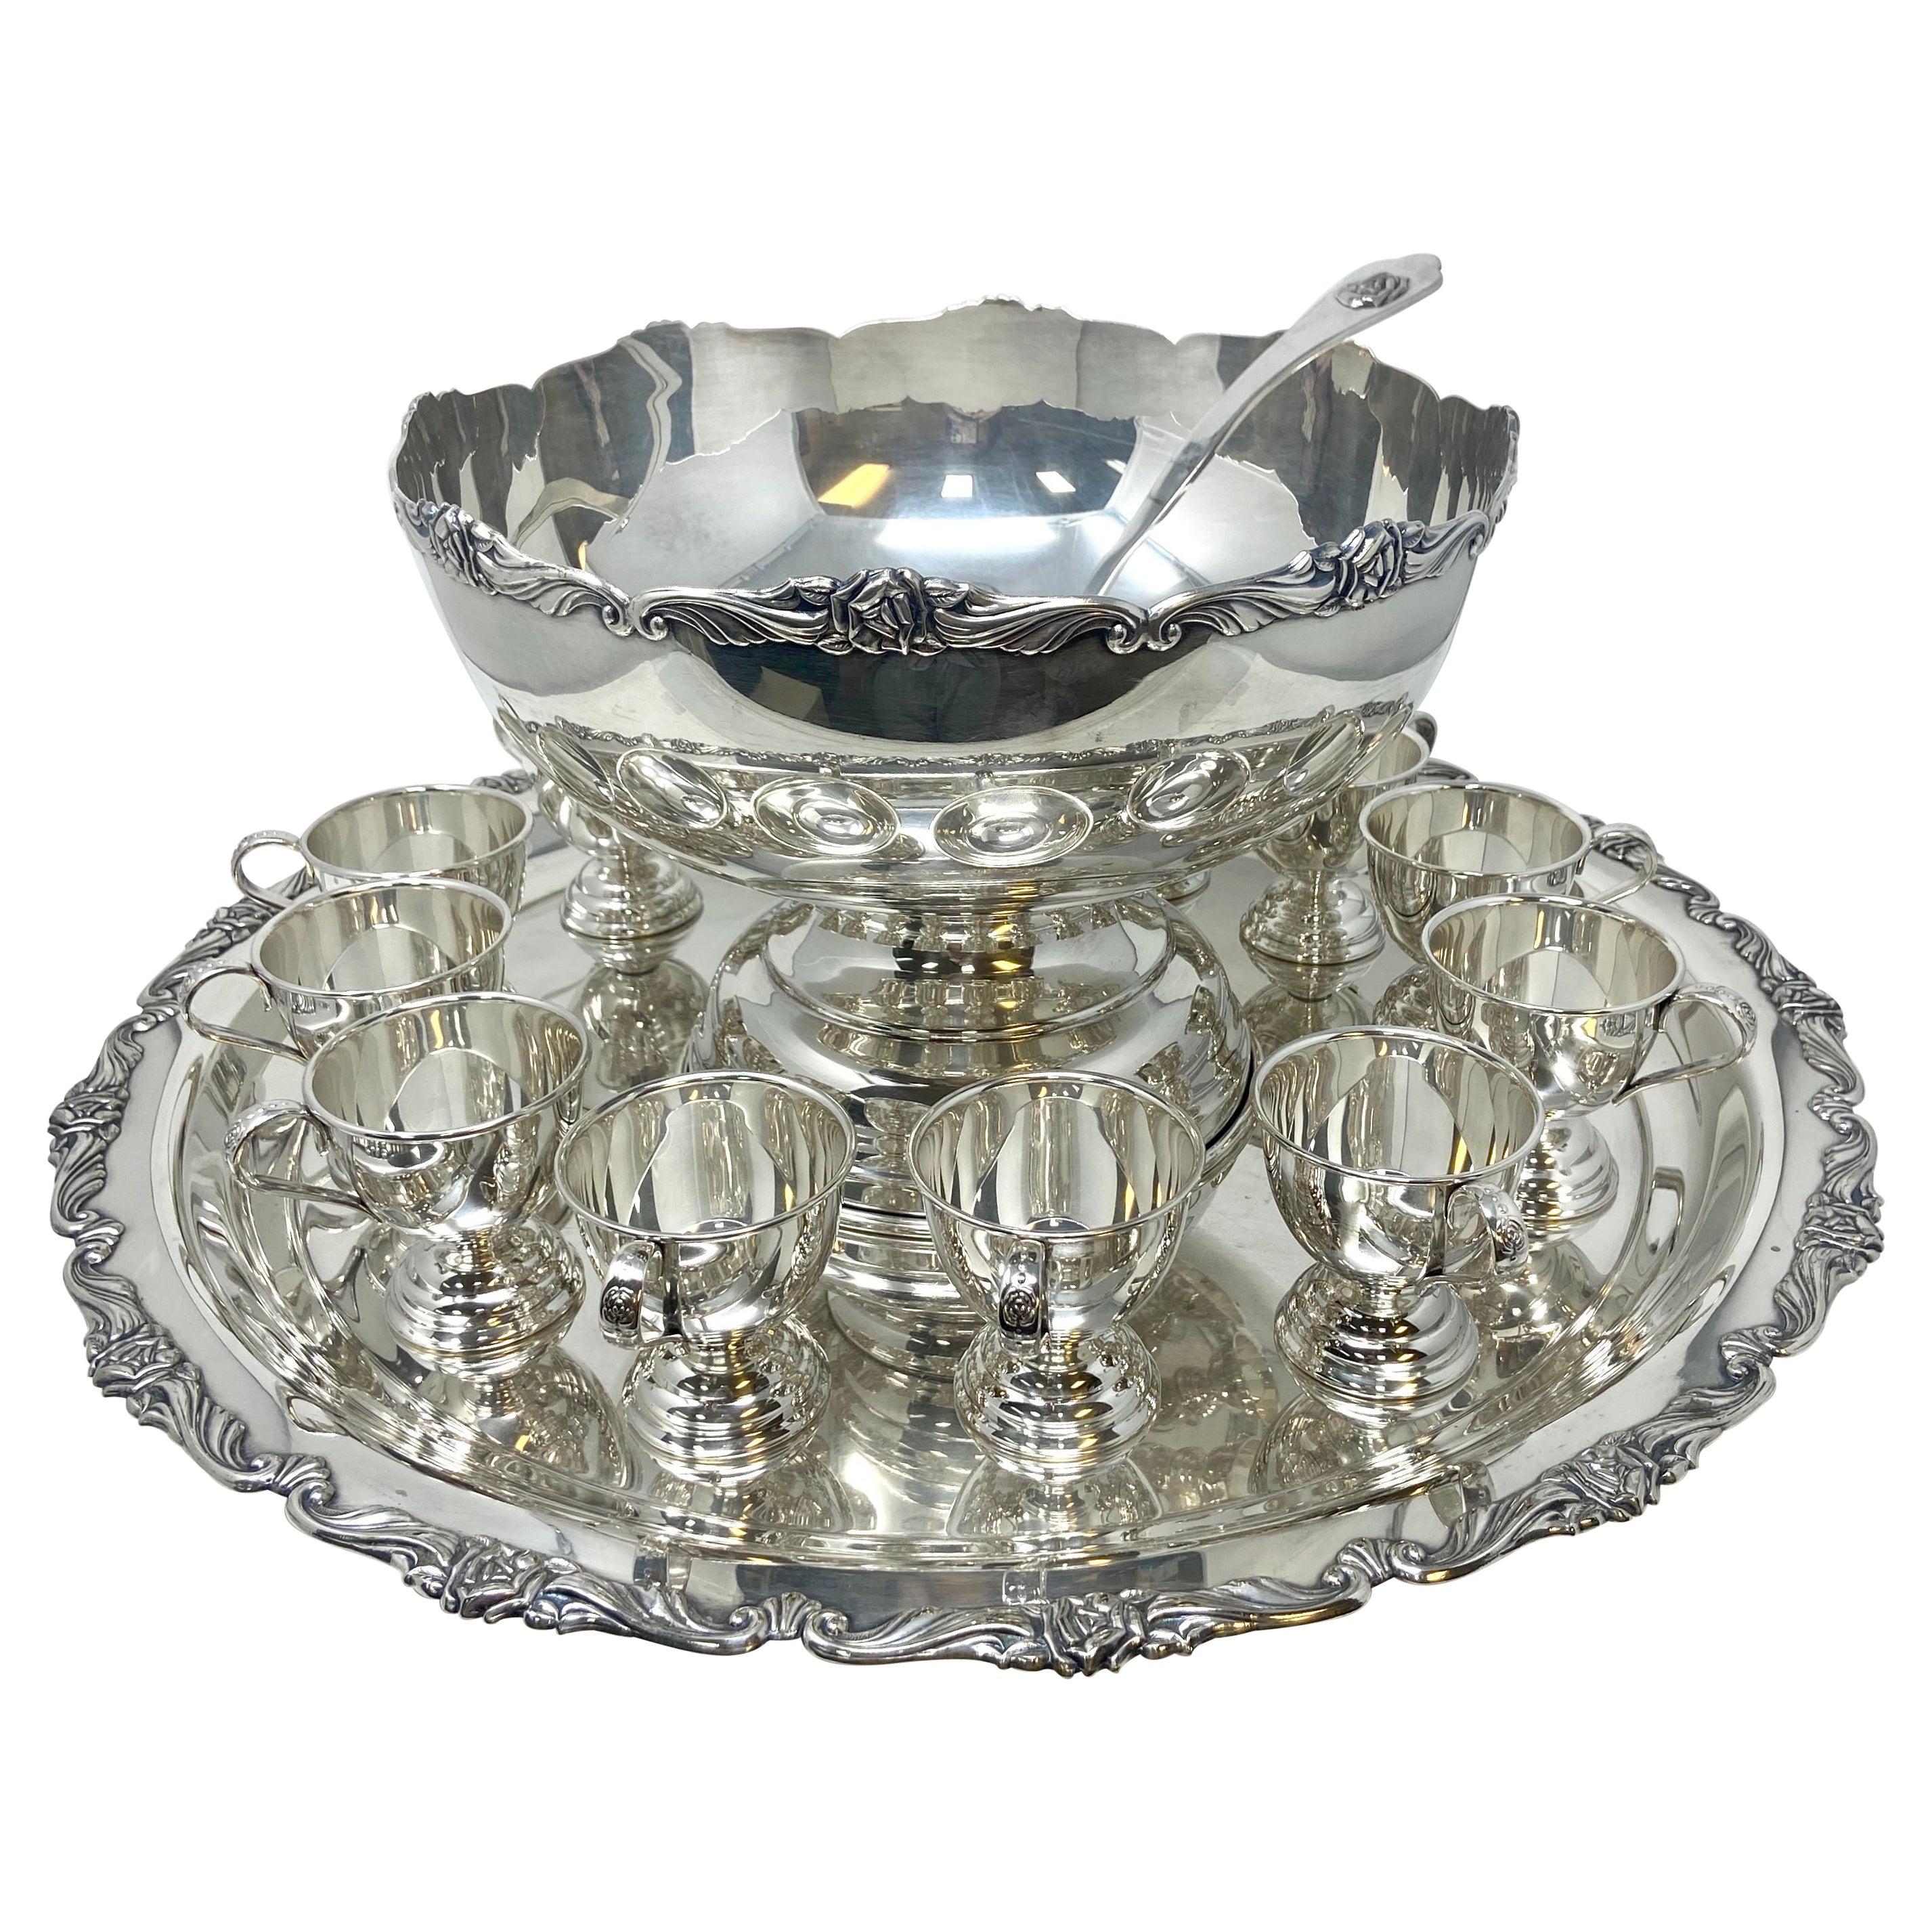 Estate Silver-Plated Punch Bowl Service with 12 Cups, Tray, & Ladle, circa 1950s